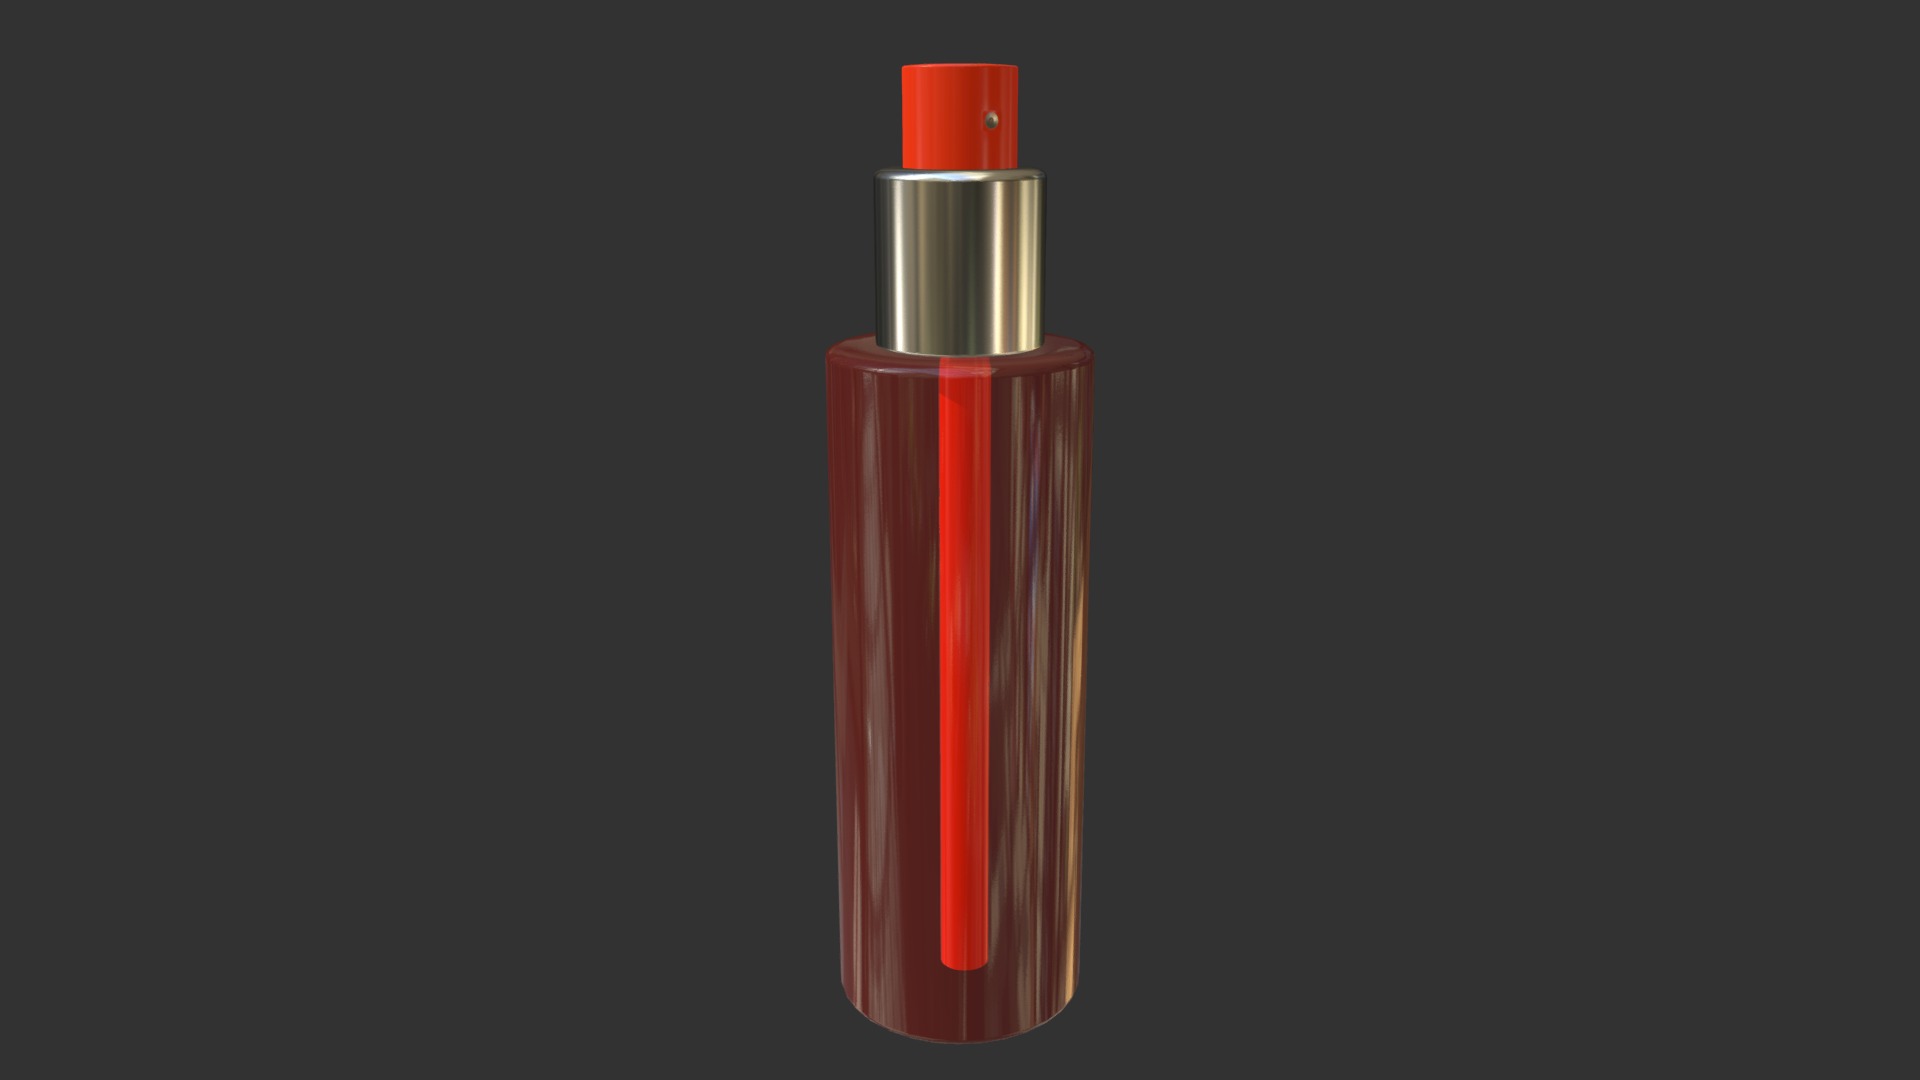 3D model Cosmetics bottle 1 - This is a 3D model of the Cosmetics bottle 1. The 3D model is about a red and white tube.